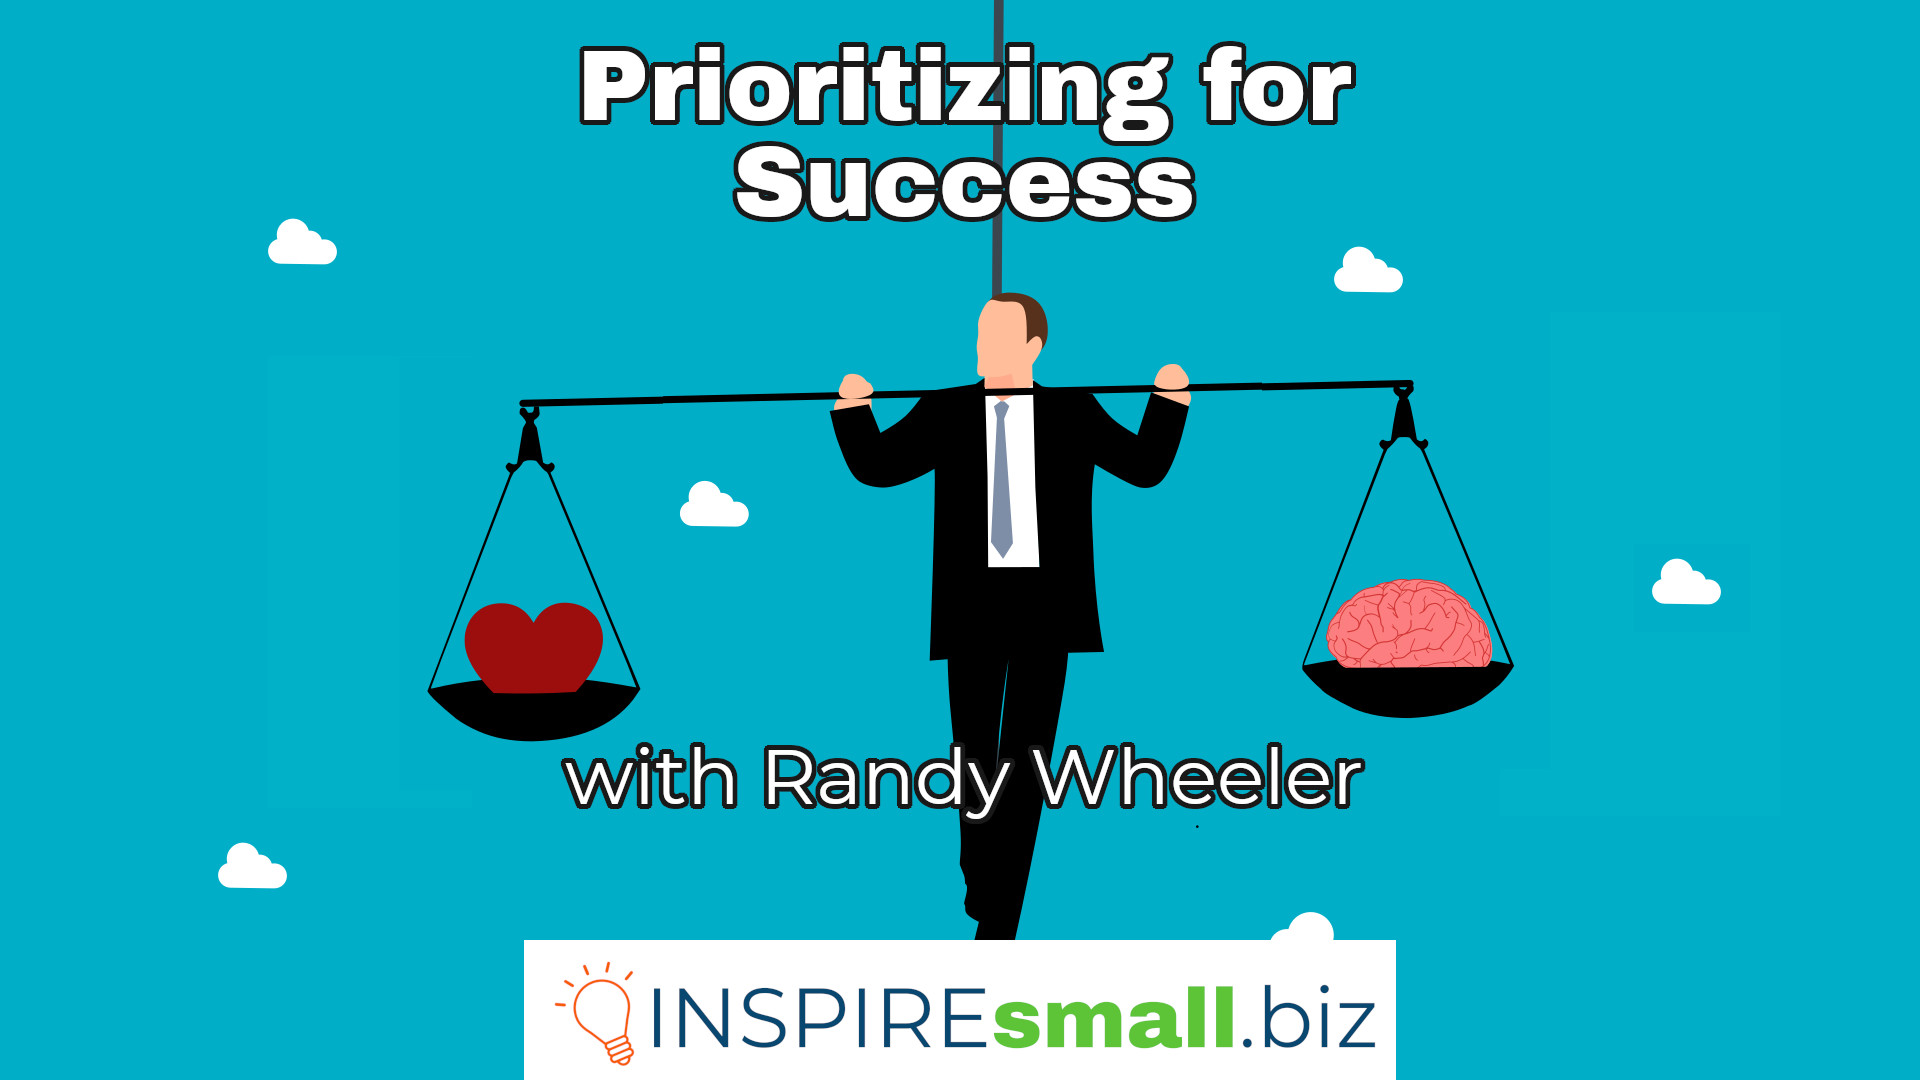 Prioritizing for Success with Randy Wheeler, hosted by INSPIREsmall.biz